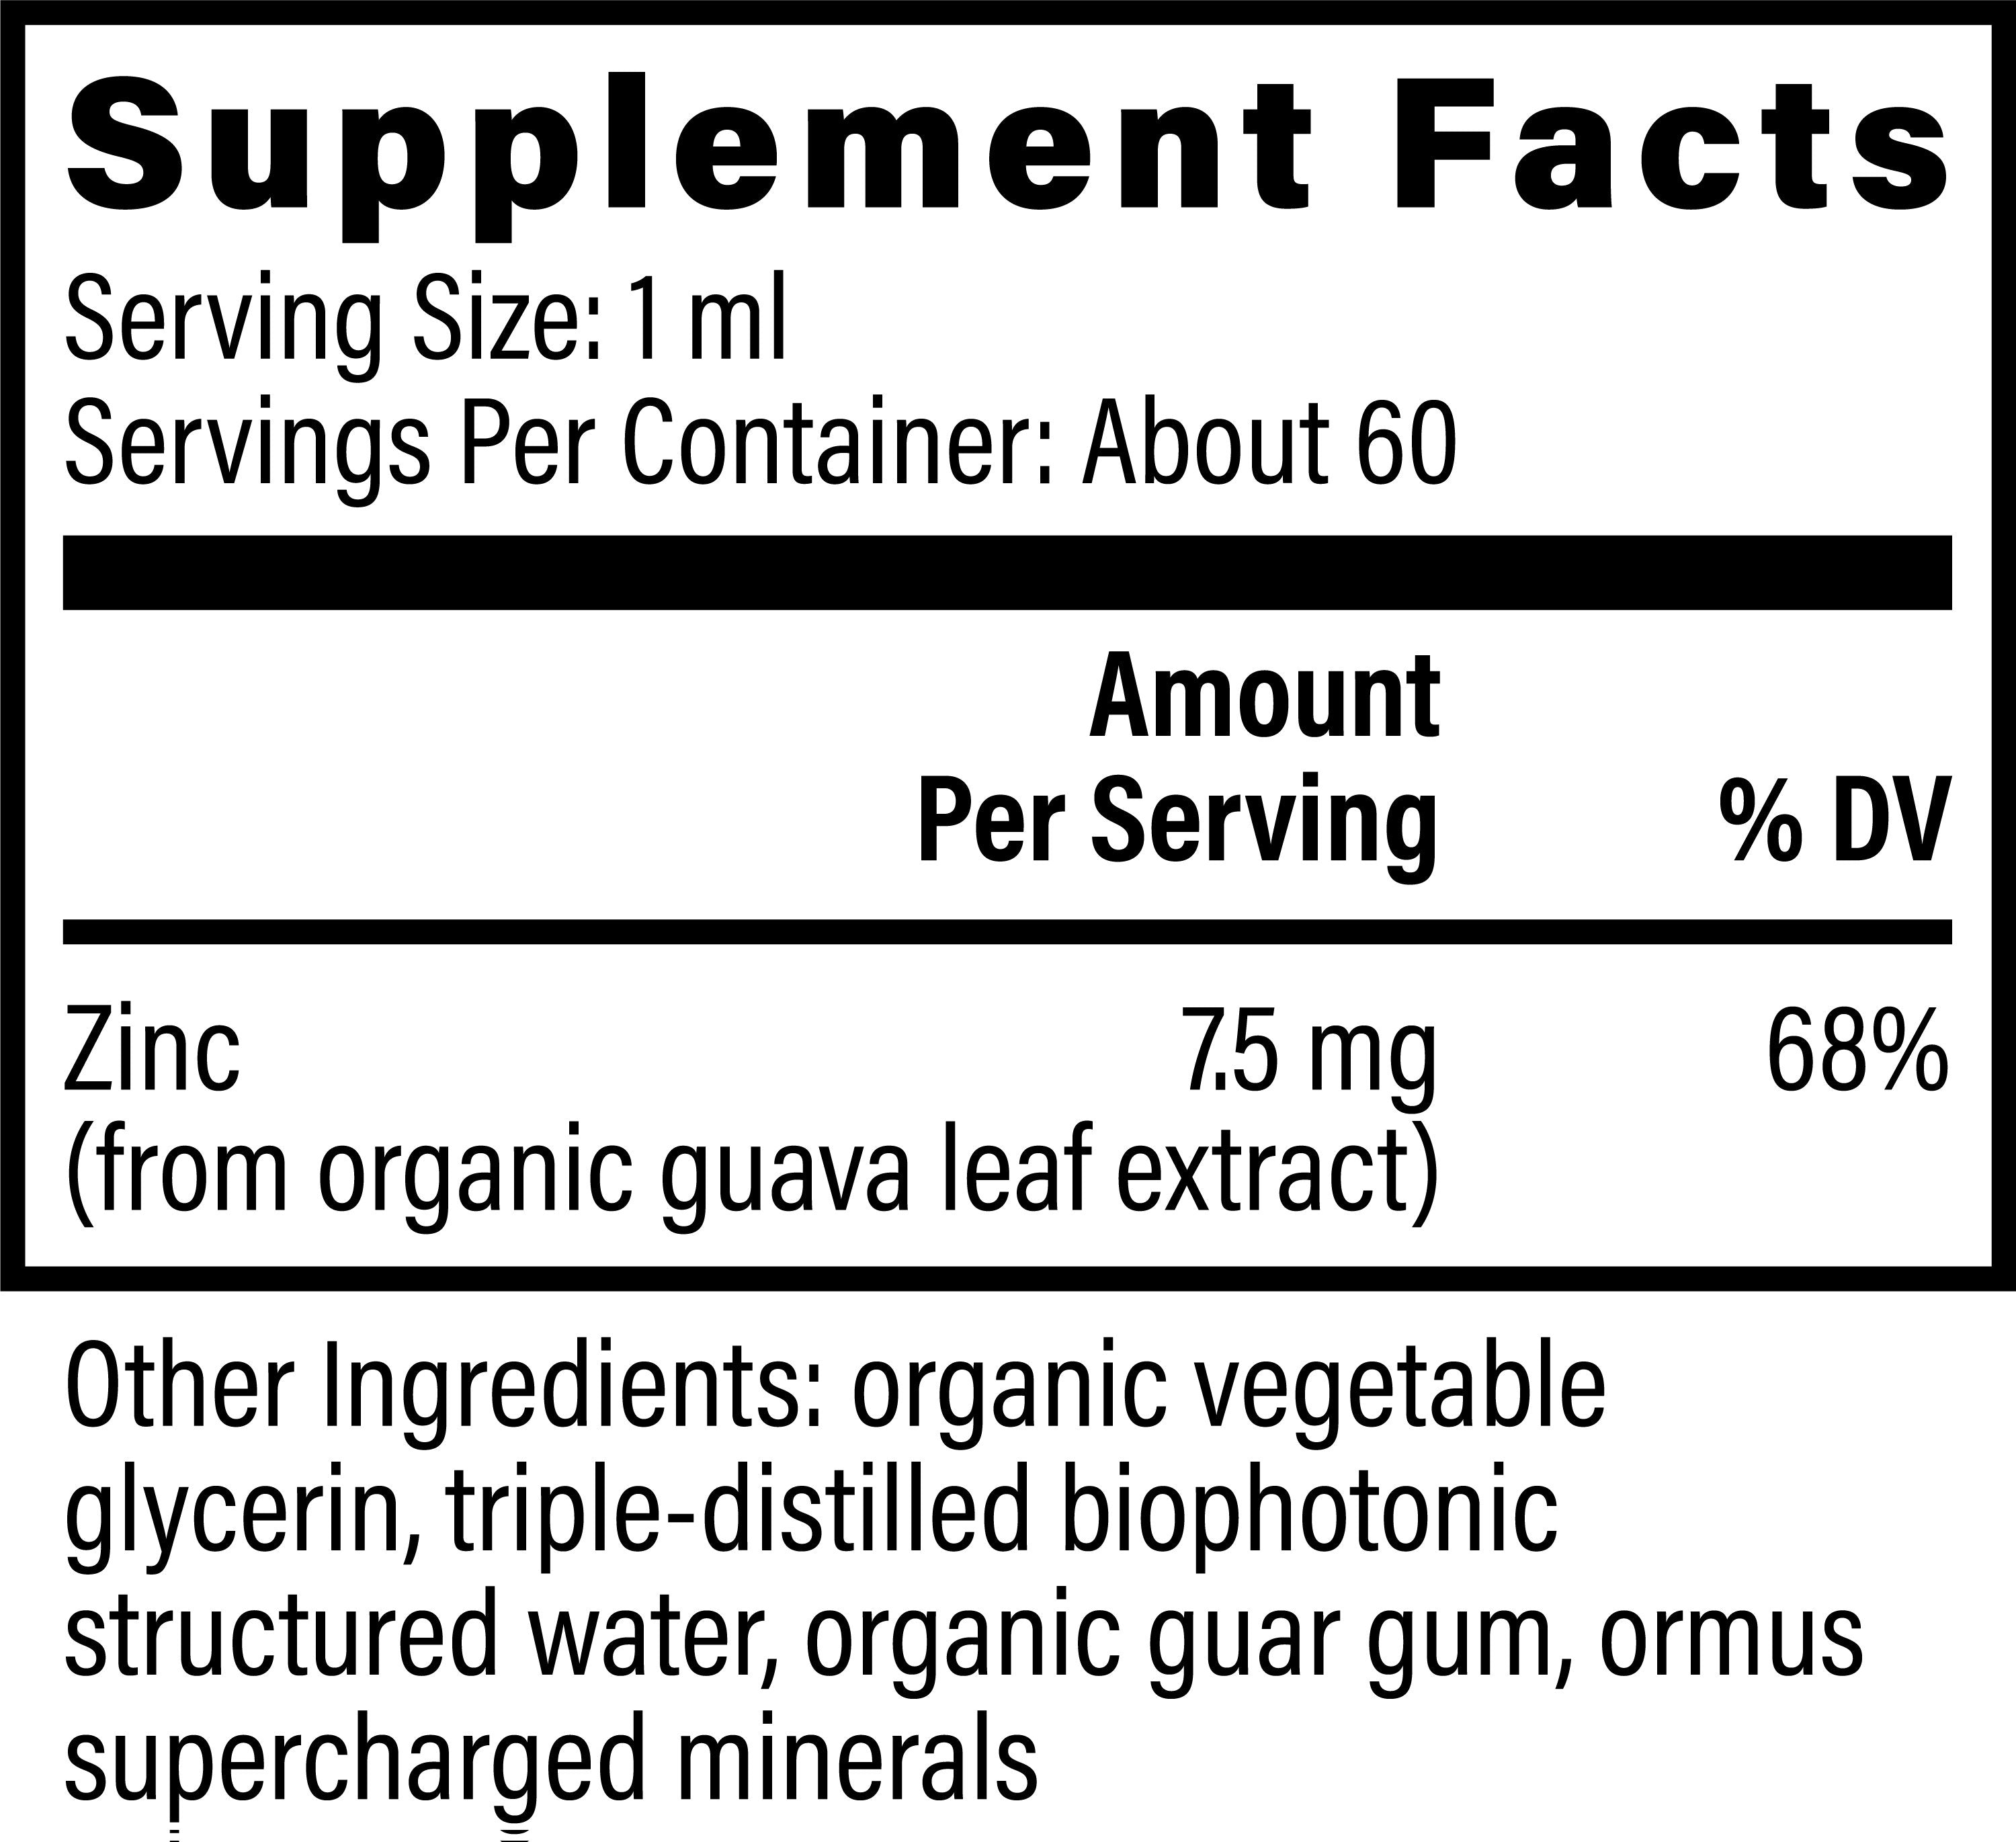 Global Healing Organic Plant Based inc from Guava Leaf Supplement Facts